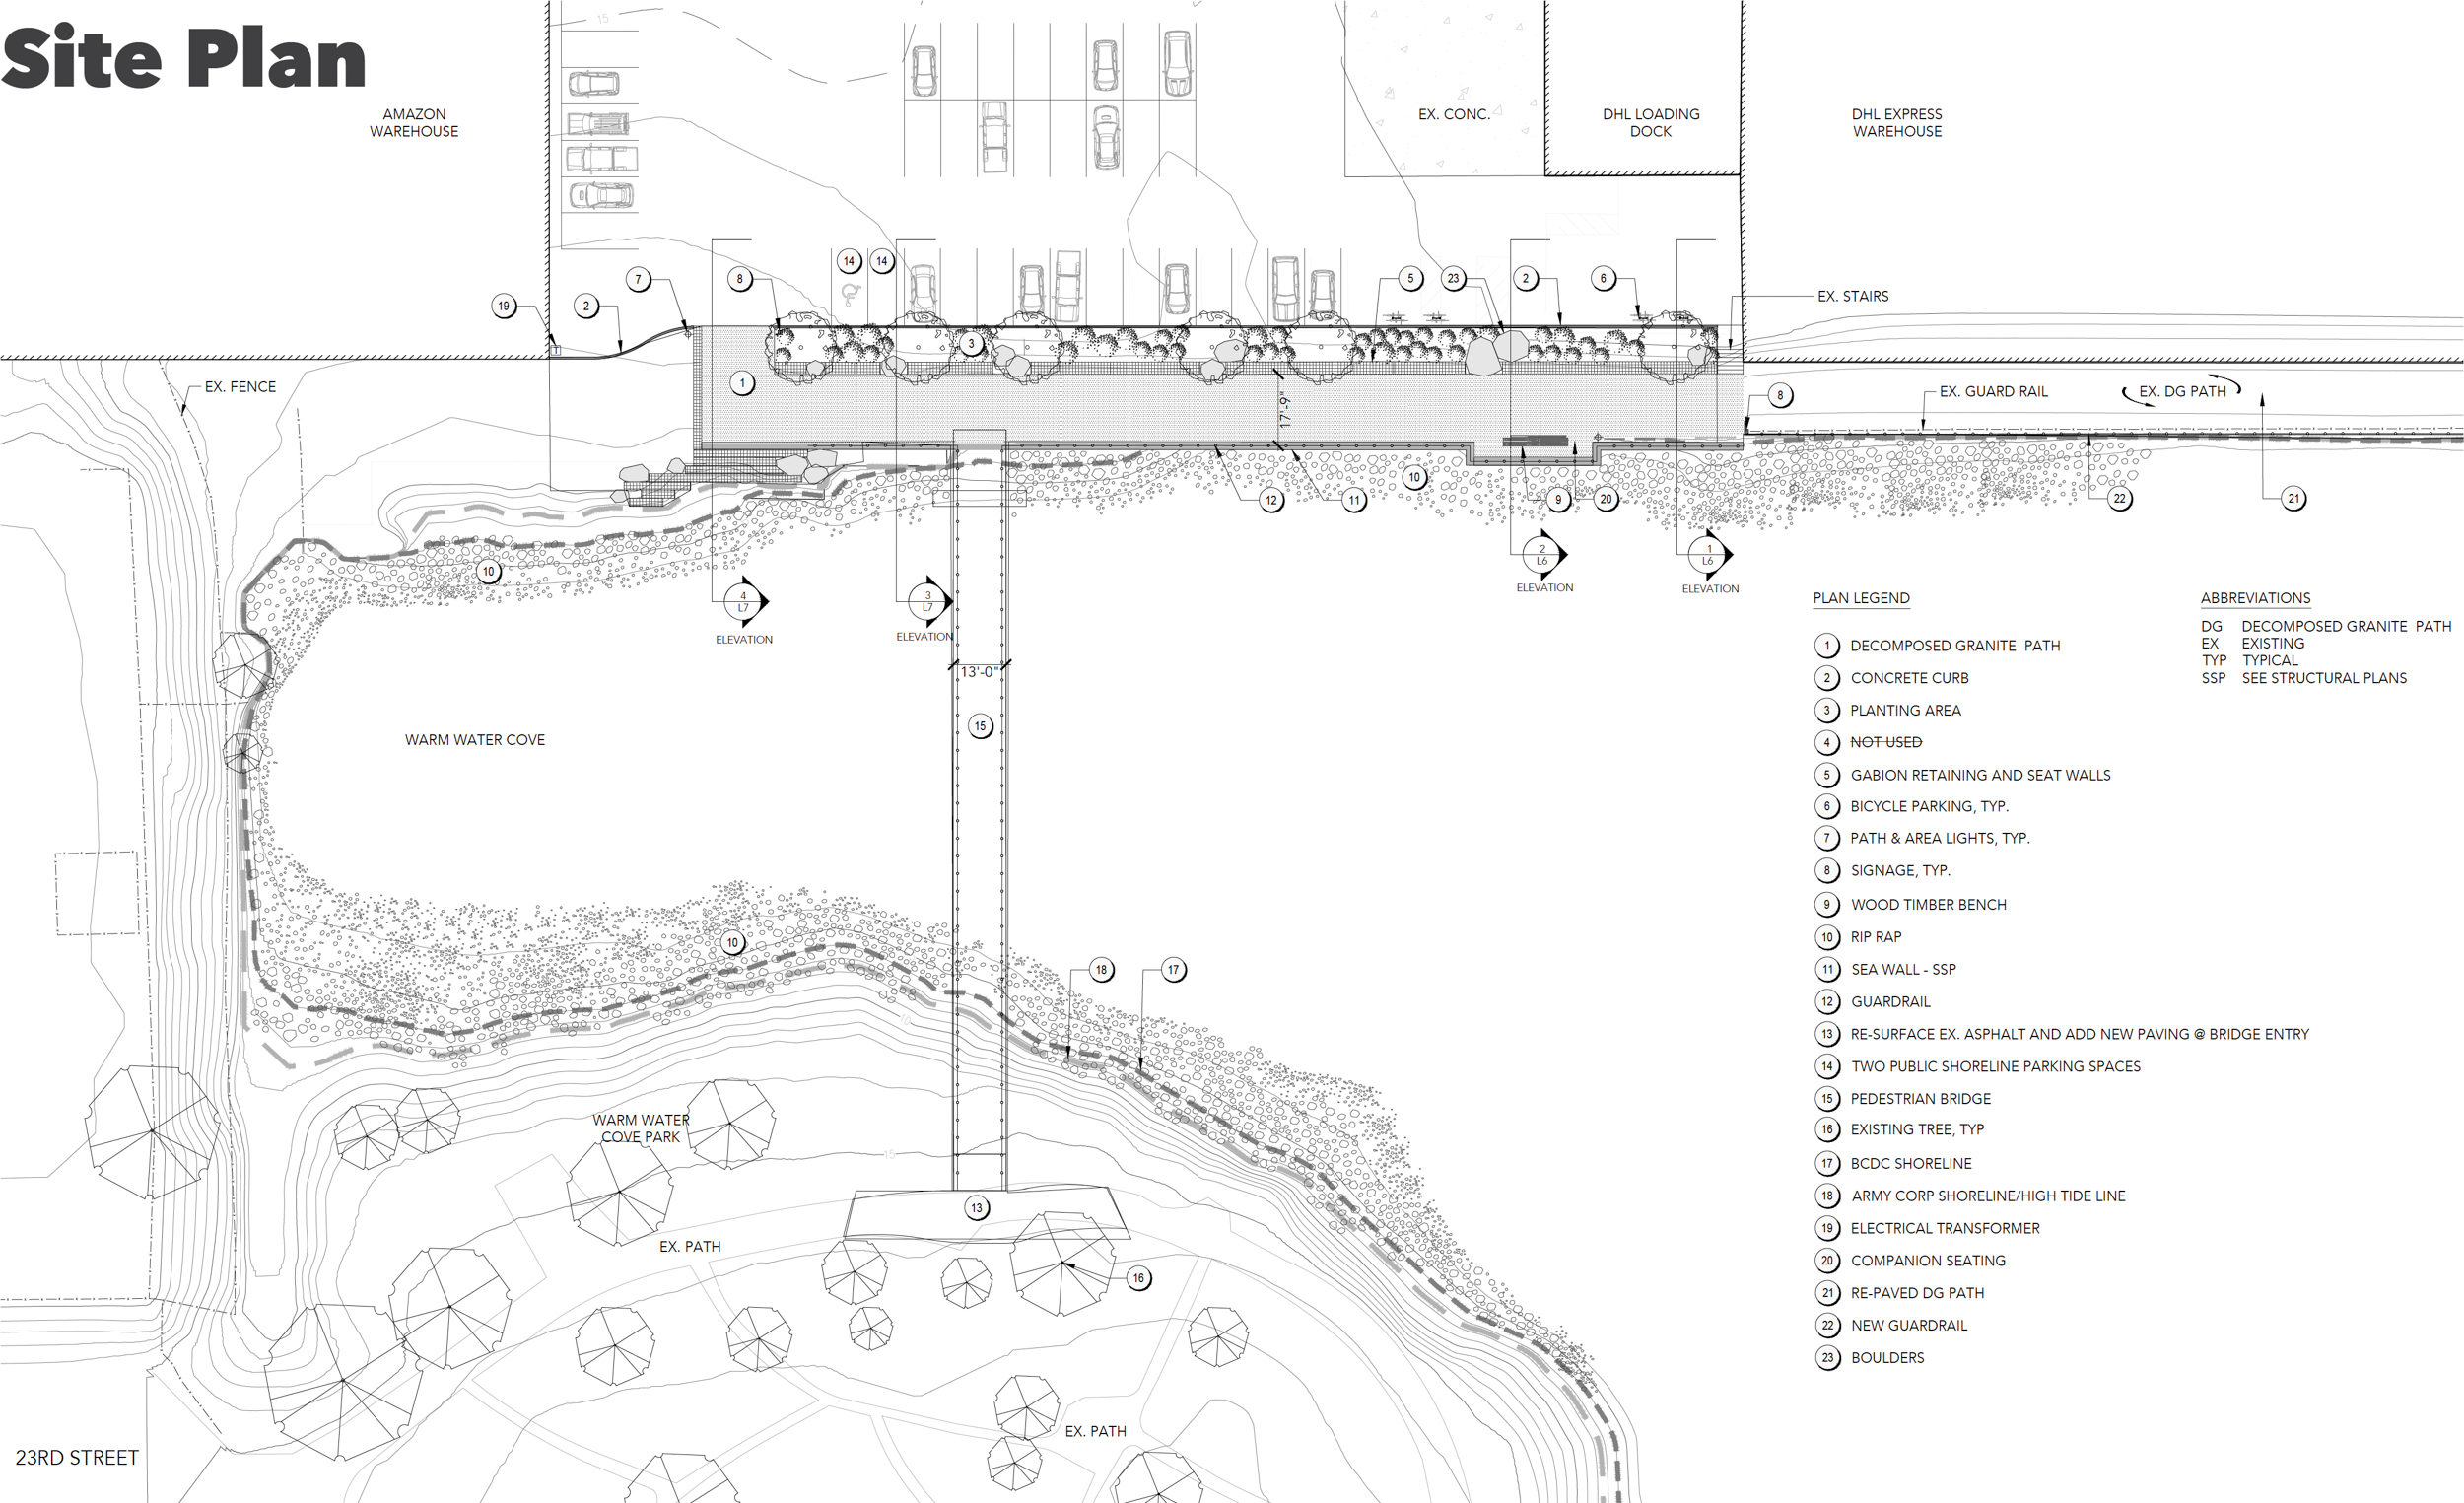 23rd Street Bay Trail site plan, illustration by Groundworks Office